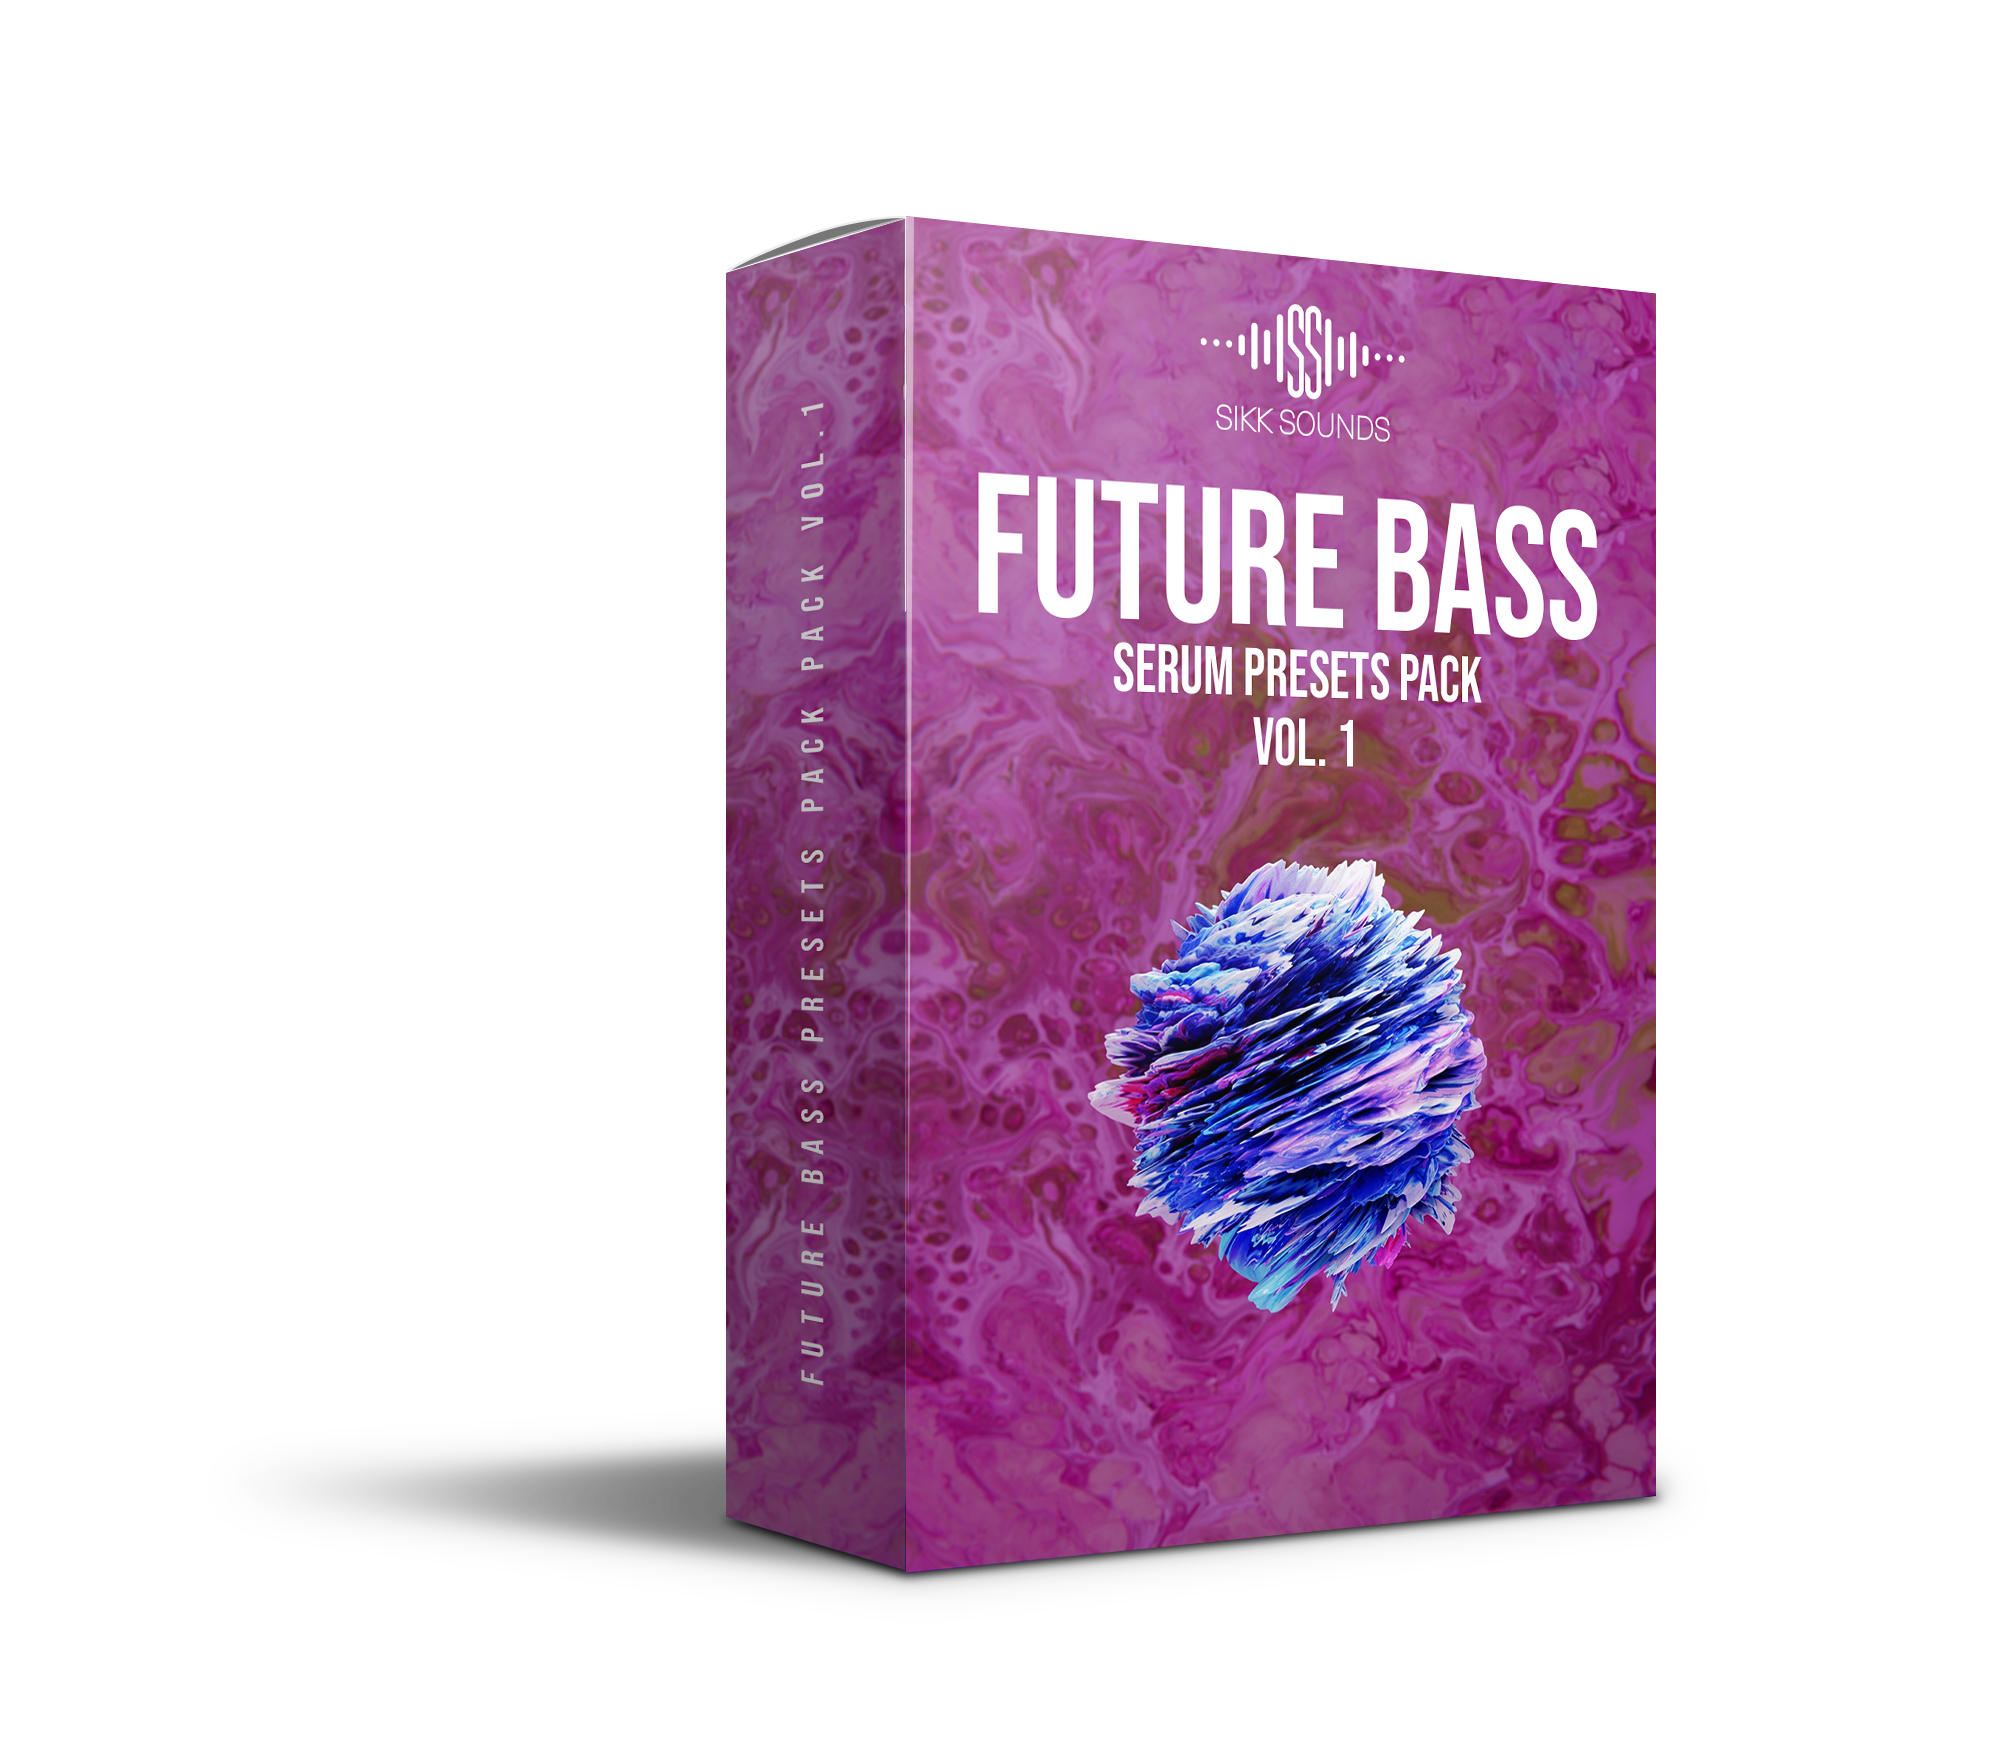 Sikk Sounds Future Bass Serum Presets Vol.1: Elevate Your Future Bass Productions